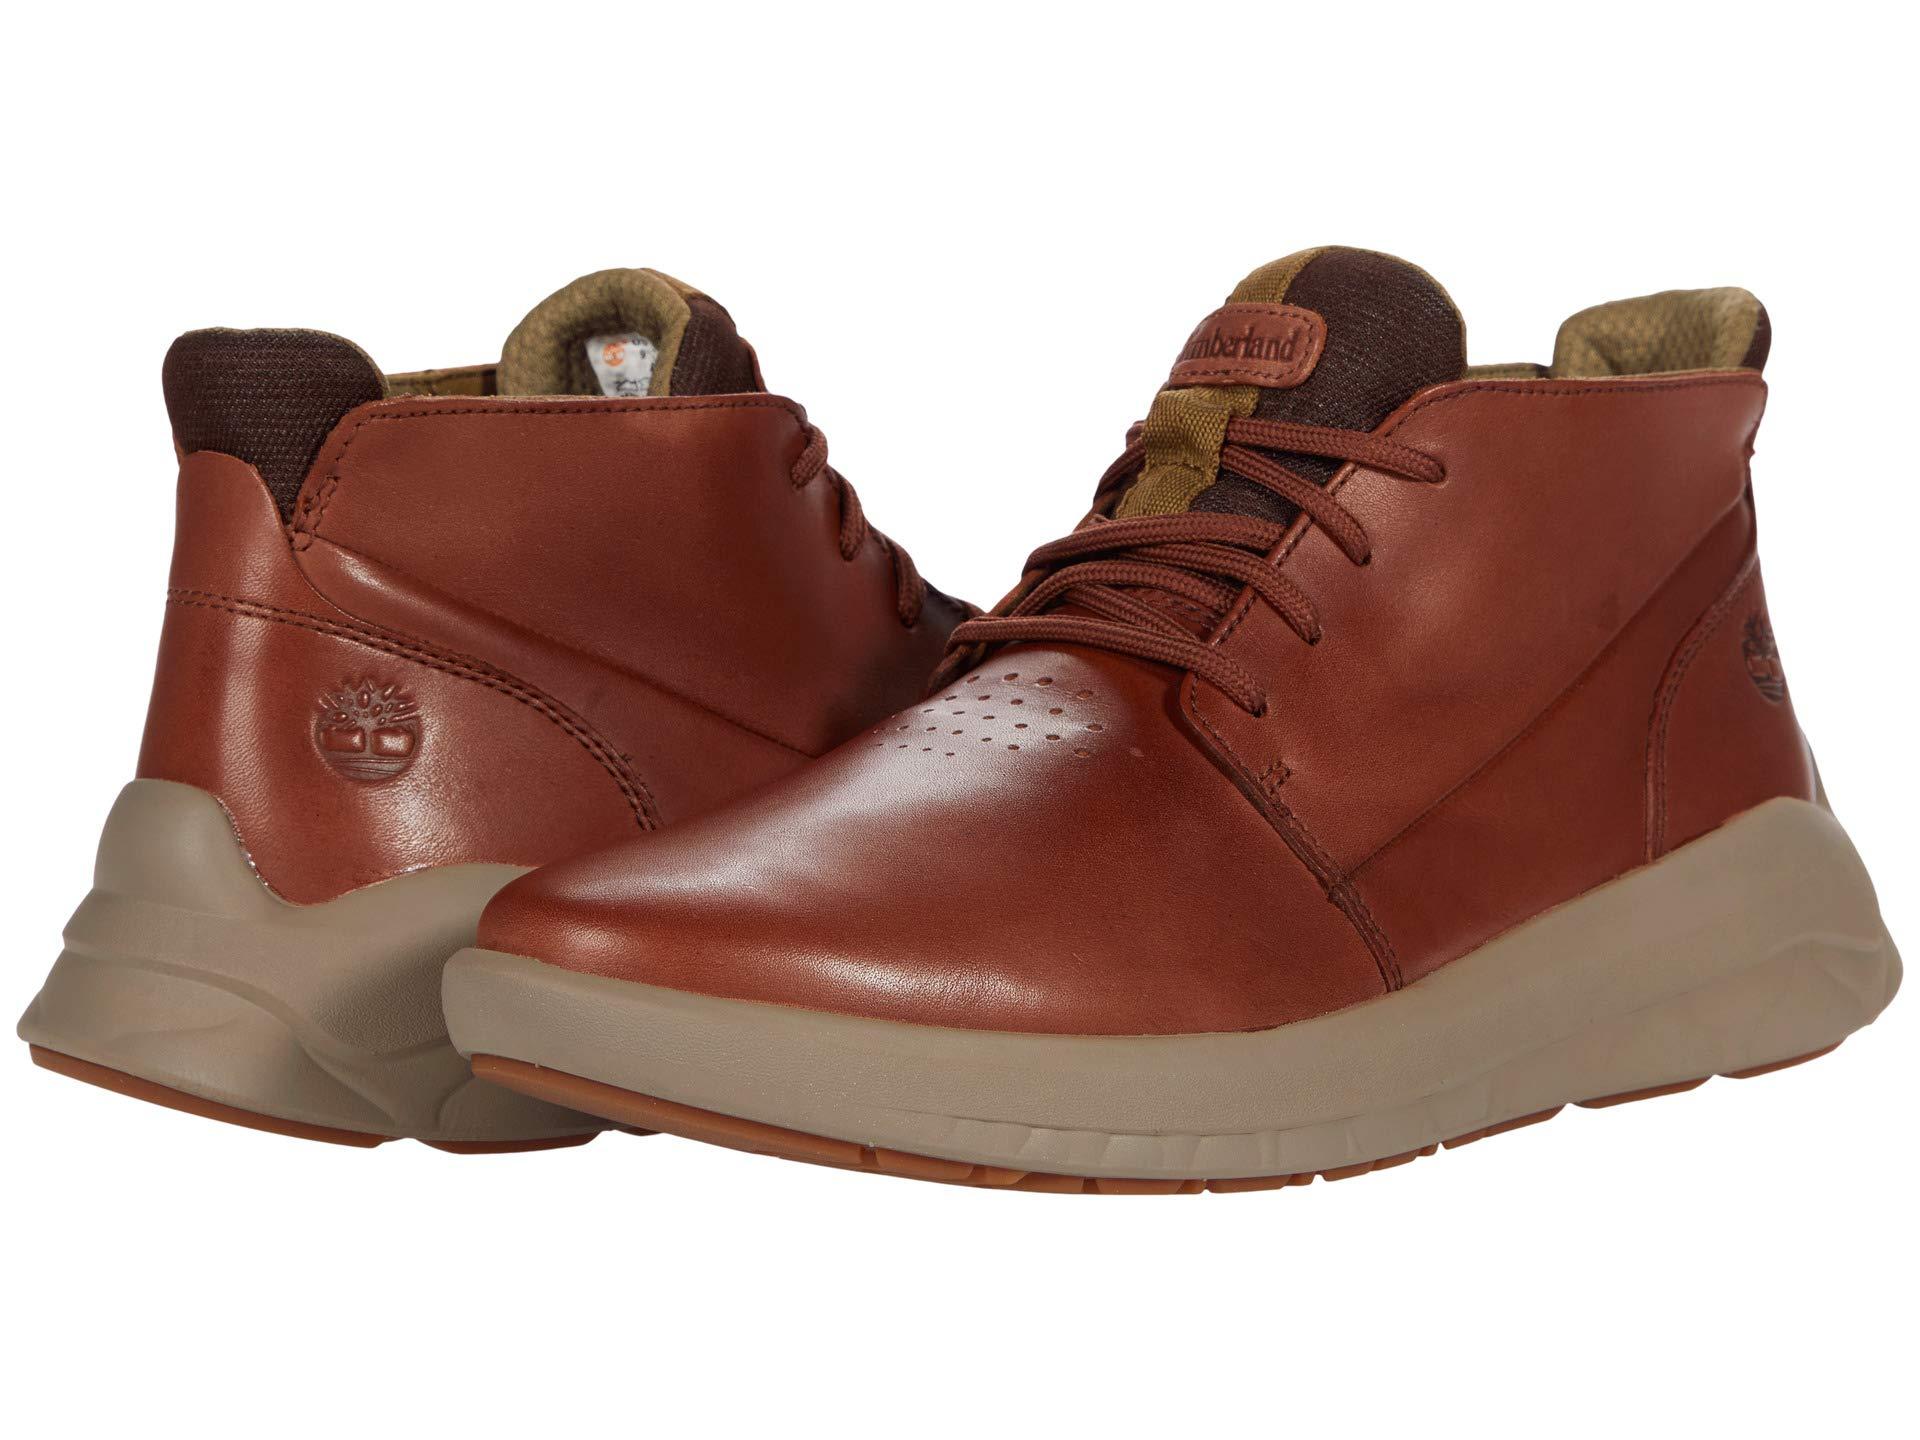 Timberland Leather Bradstreet Ultra Pt Chukka in Brown for Men - Lyst